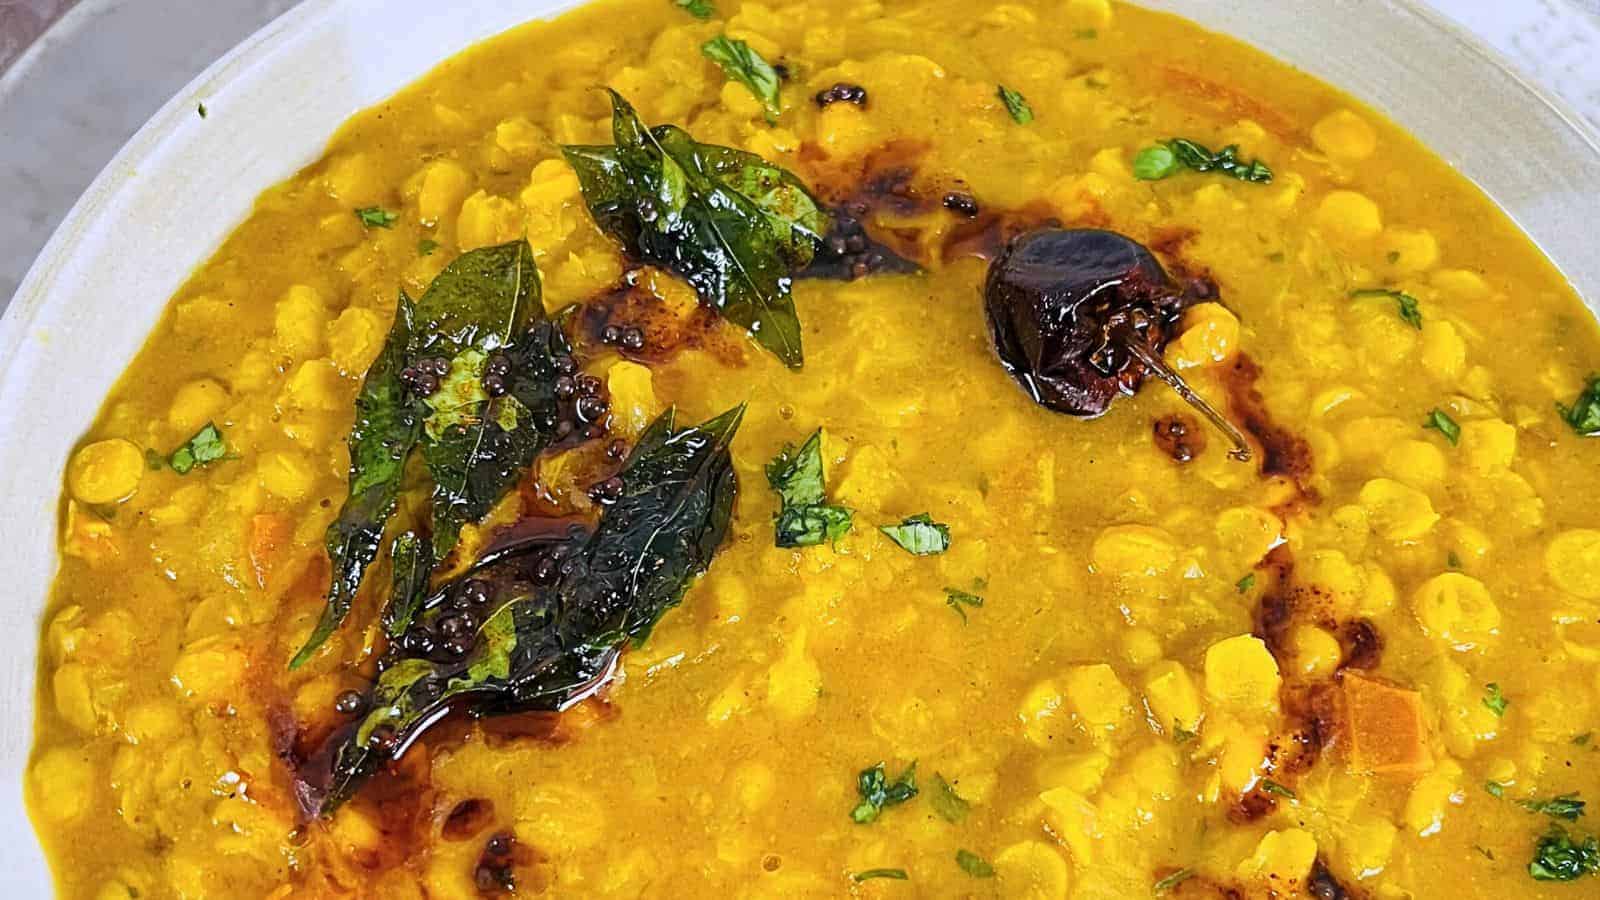 <p>A hearty, nutritious lentil dish that comforts and satisfies with rich flavors. A staple for its simplicity and taste, made easier with an Instant Pot. This dal shows the wholesome deliciousness of legumes, transformed into a beloved dish. Instant Pot Chana Dal is a testament to the power of simple, flavorful cooking.<br><strong>Get the Recipe: </strong><a href="https://easyindiancookbook.com/chana-dal/?utm_source=msn&utm_medium=page&utm_campaign=">Instant Pot Chana Dal</a></p> <div class="remoji_bar">          <div class="remoji_error_bar">   Error happened.   </div>  </div> <p>The post <a href="https://fooddrinklife.com/travel-to-india-in-a-bite/">Travel to India in a bite! 19 mind-blowing recipes! Authentic flavors, right here!</a> appeared first on <a href="https://fooddrinklife.com">Food Drink Life</a>.</p>